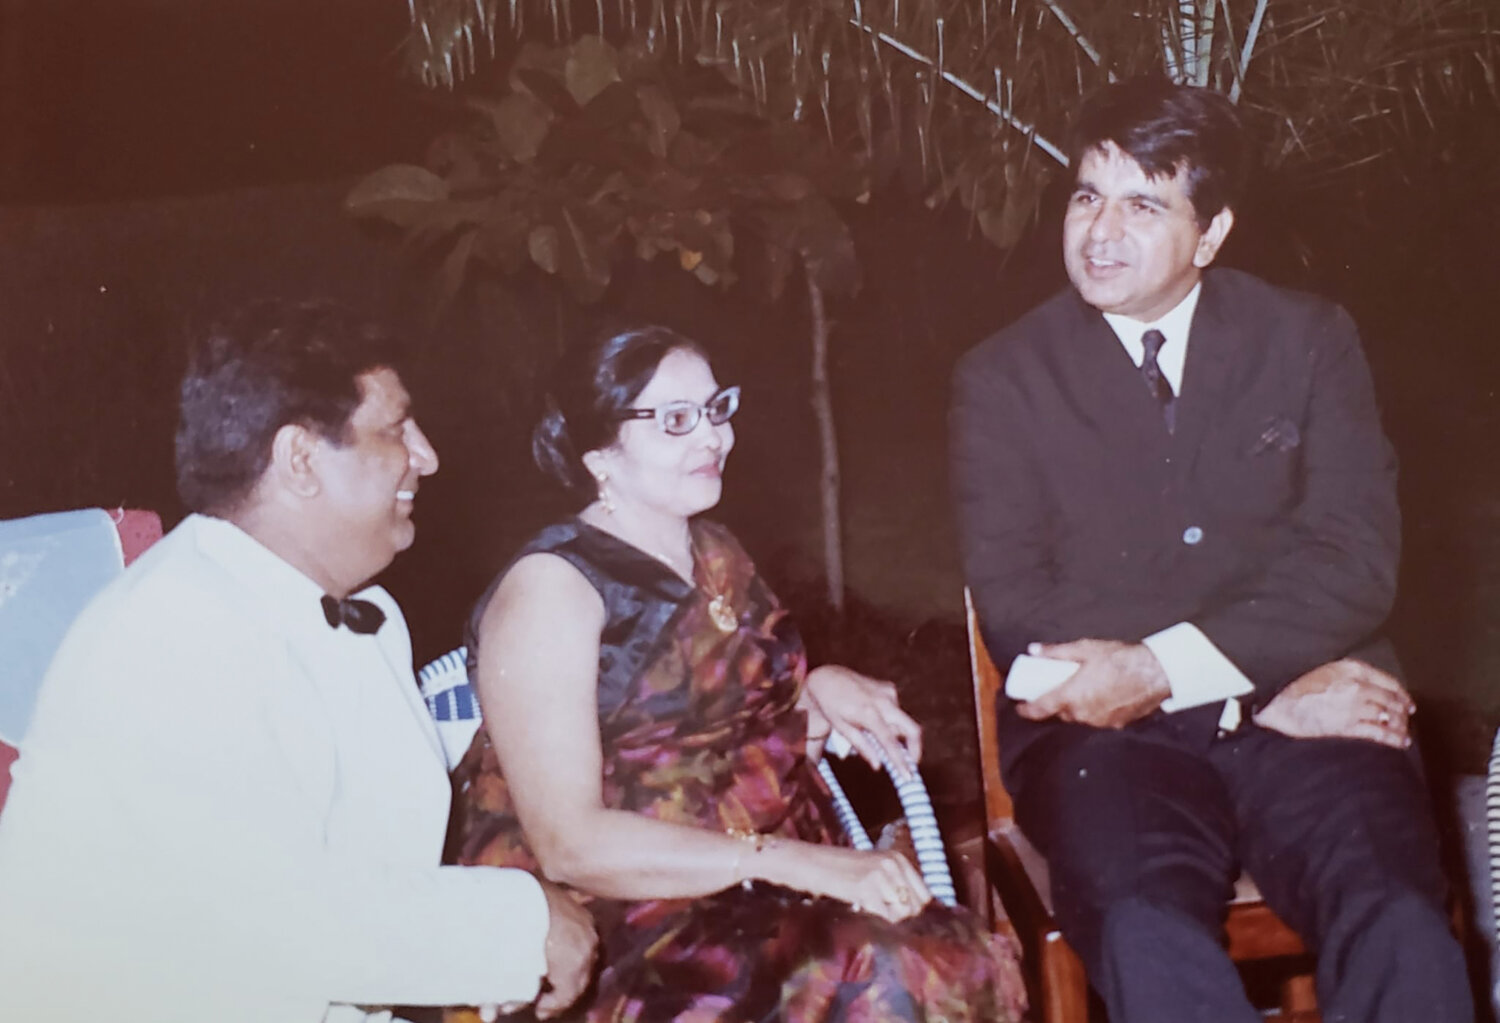 Mohamed Khaki’s aunt and uncle, Zera and Haider Dhanani, with Dilip Kumar at a reception in Dar es Salaam in 1969.